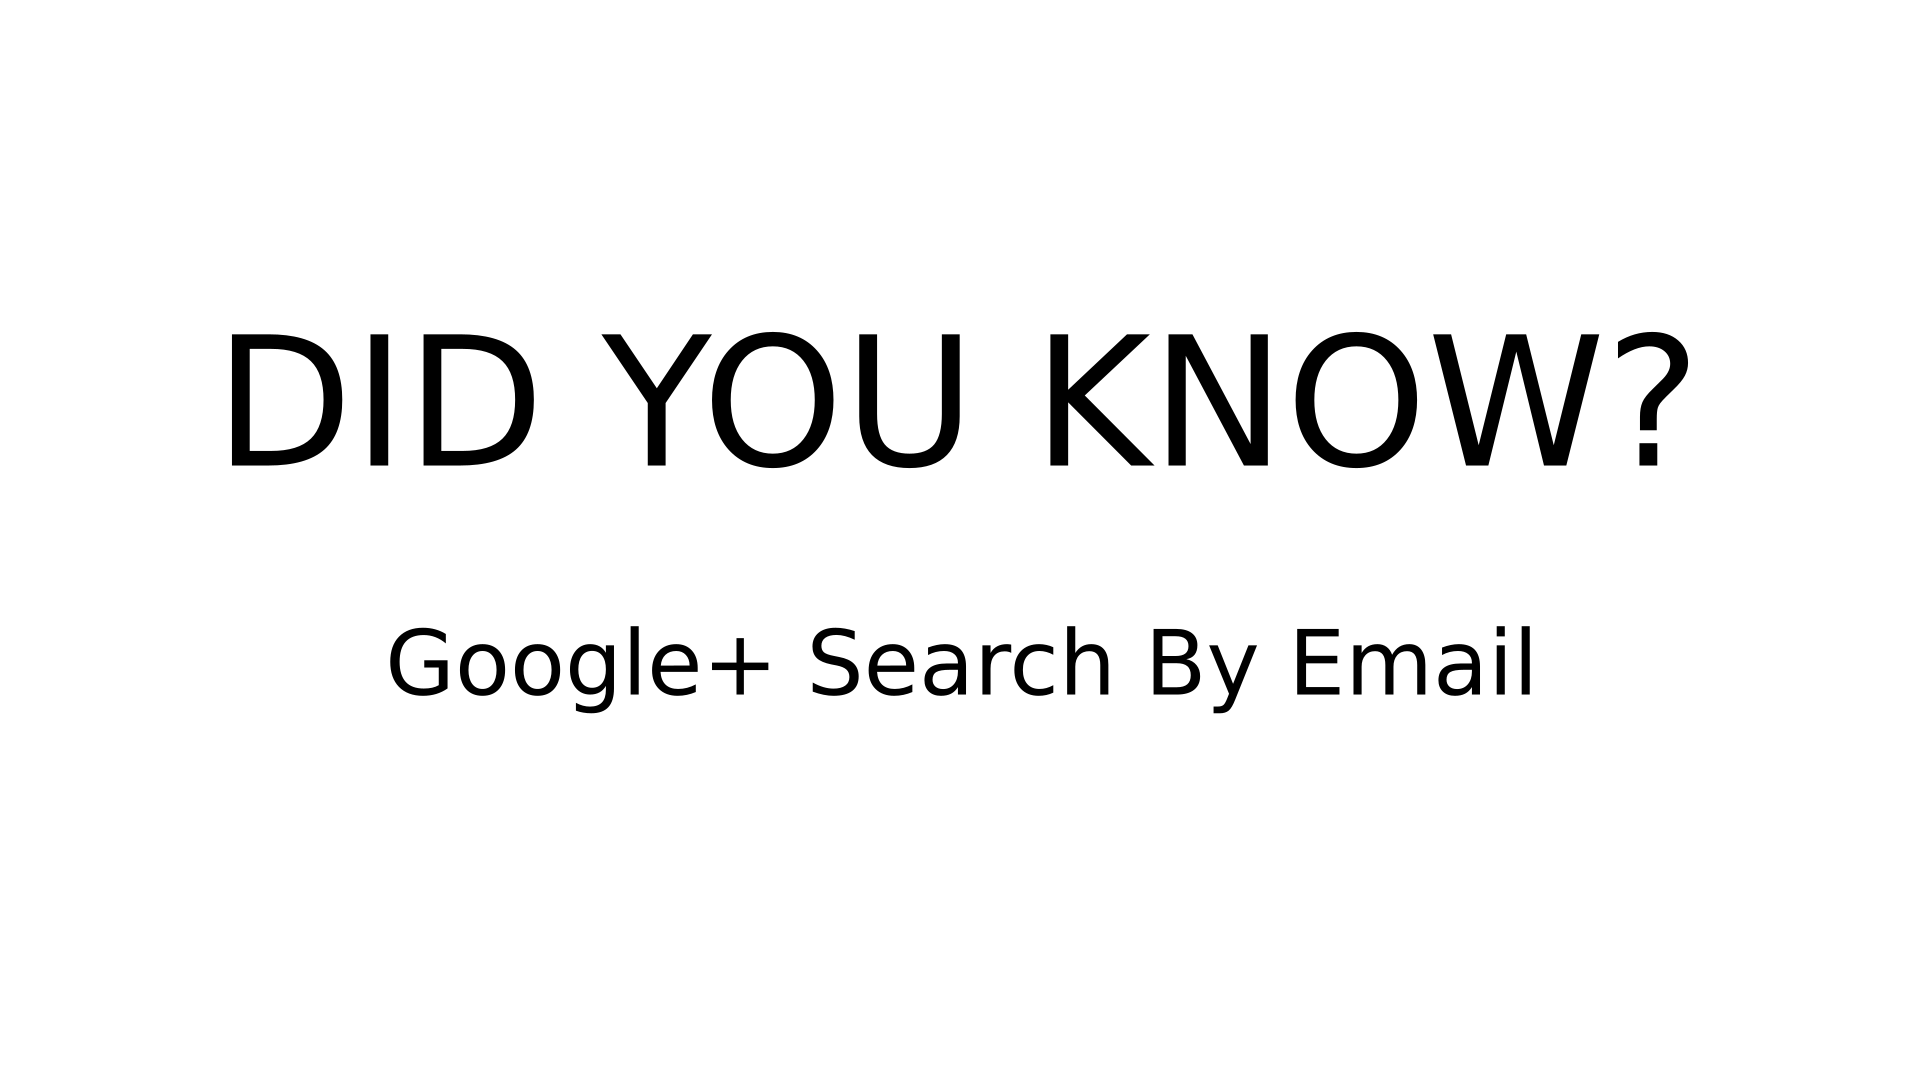 DID YOU KNOW? - Google+ Search By Email